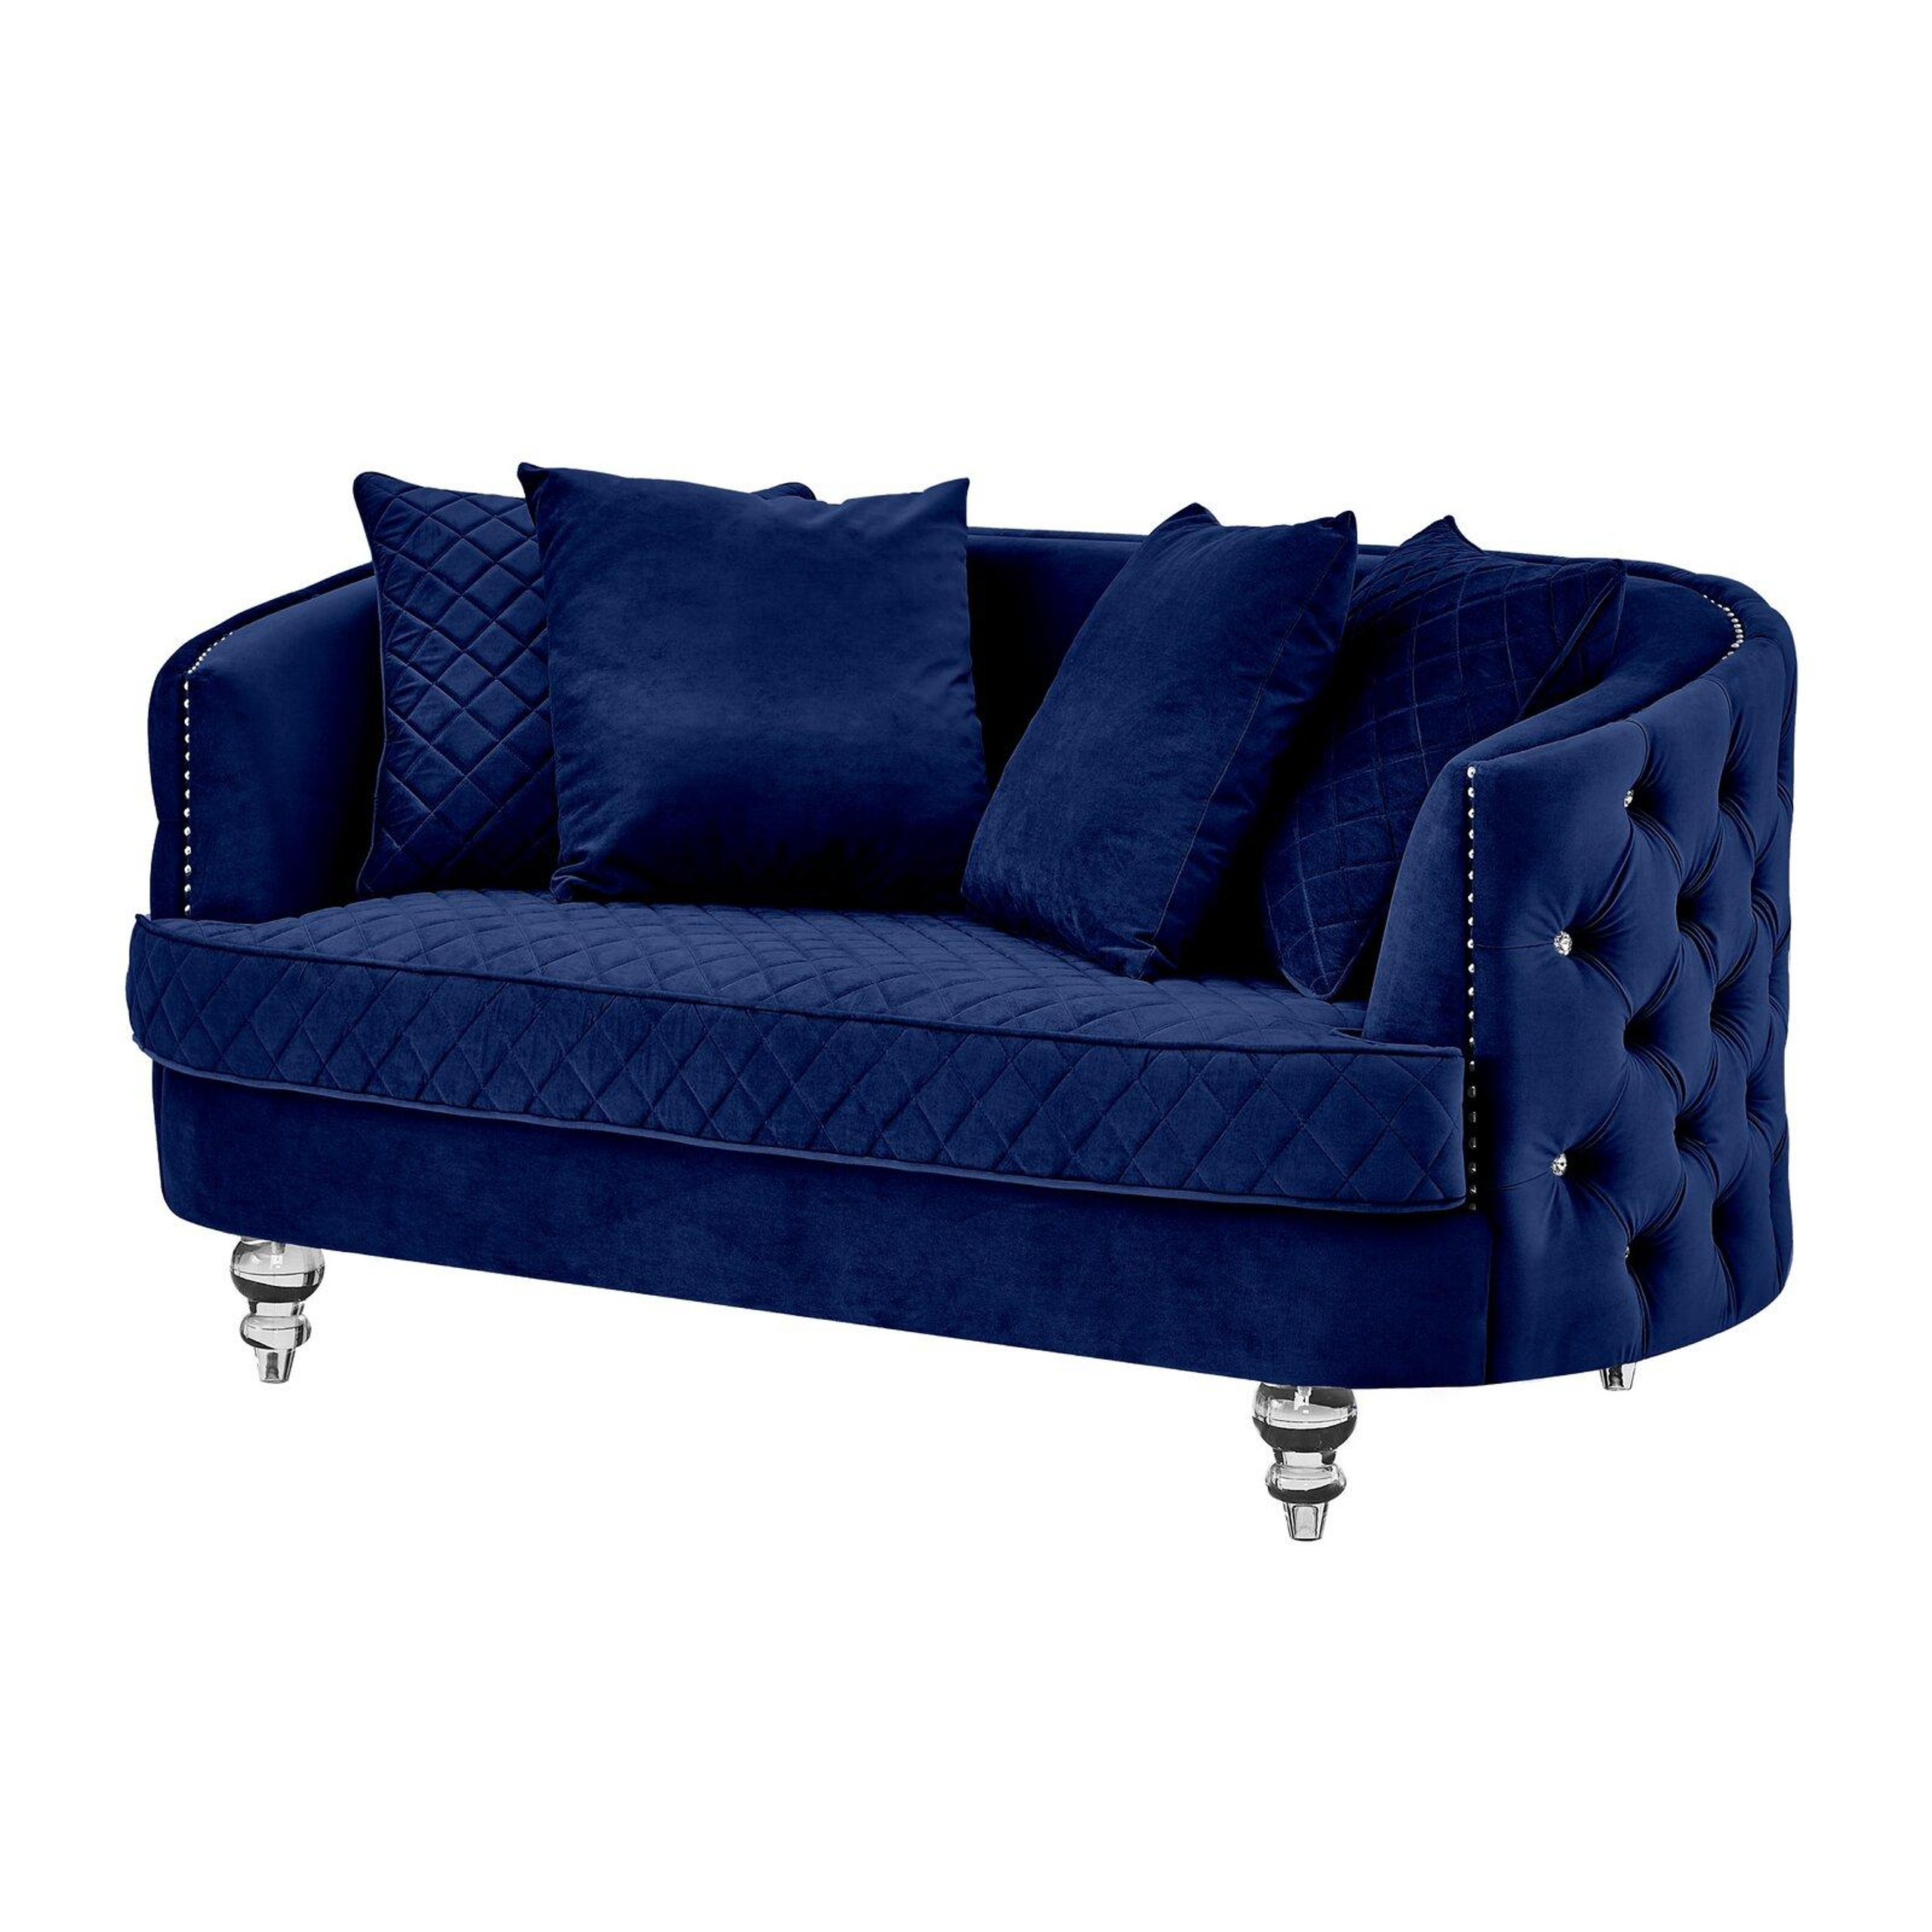 Luxury NAVY & GOLD Chenille Loveseat VICTORIA Galaxy Home Traditional ...